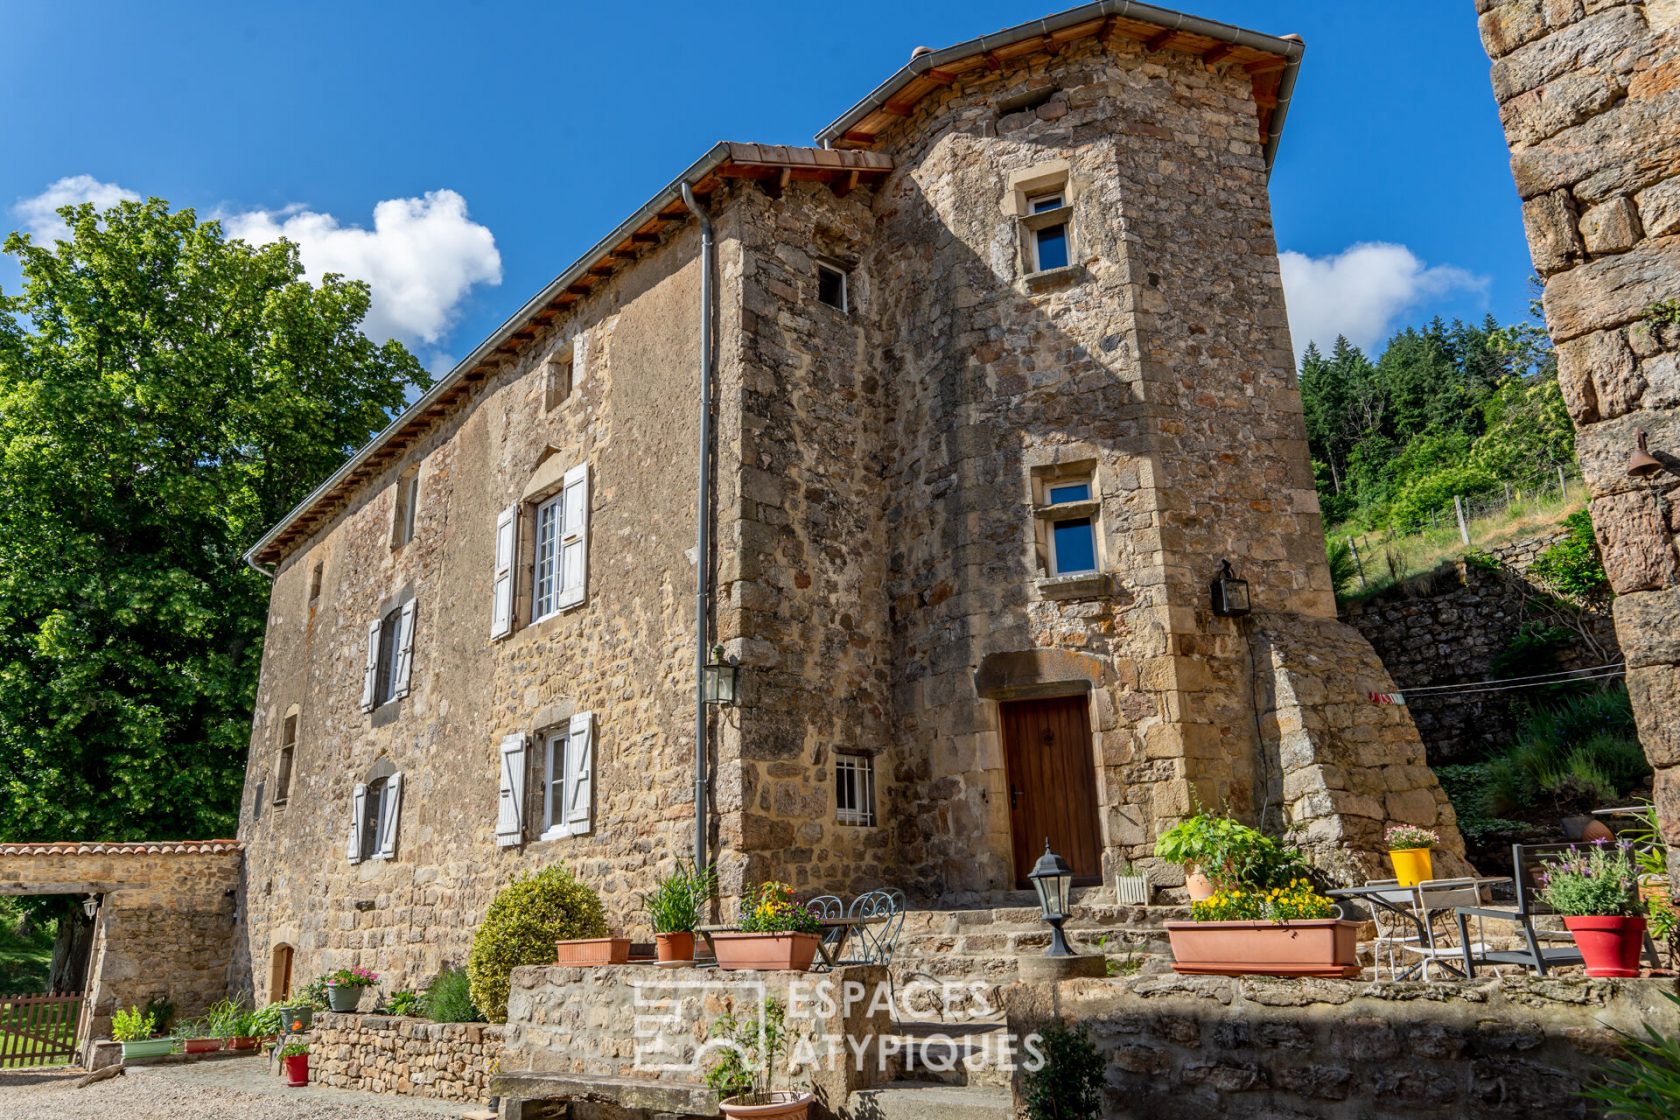 15th century fortified house in Ardèche Verte